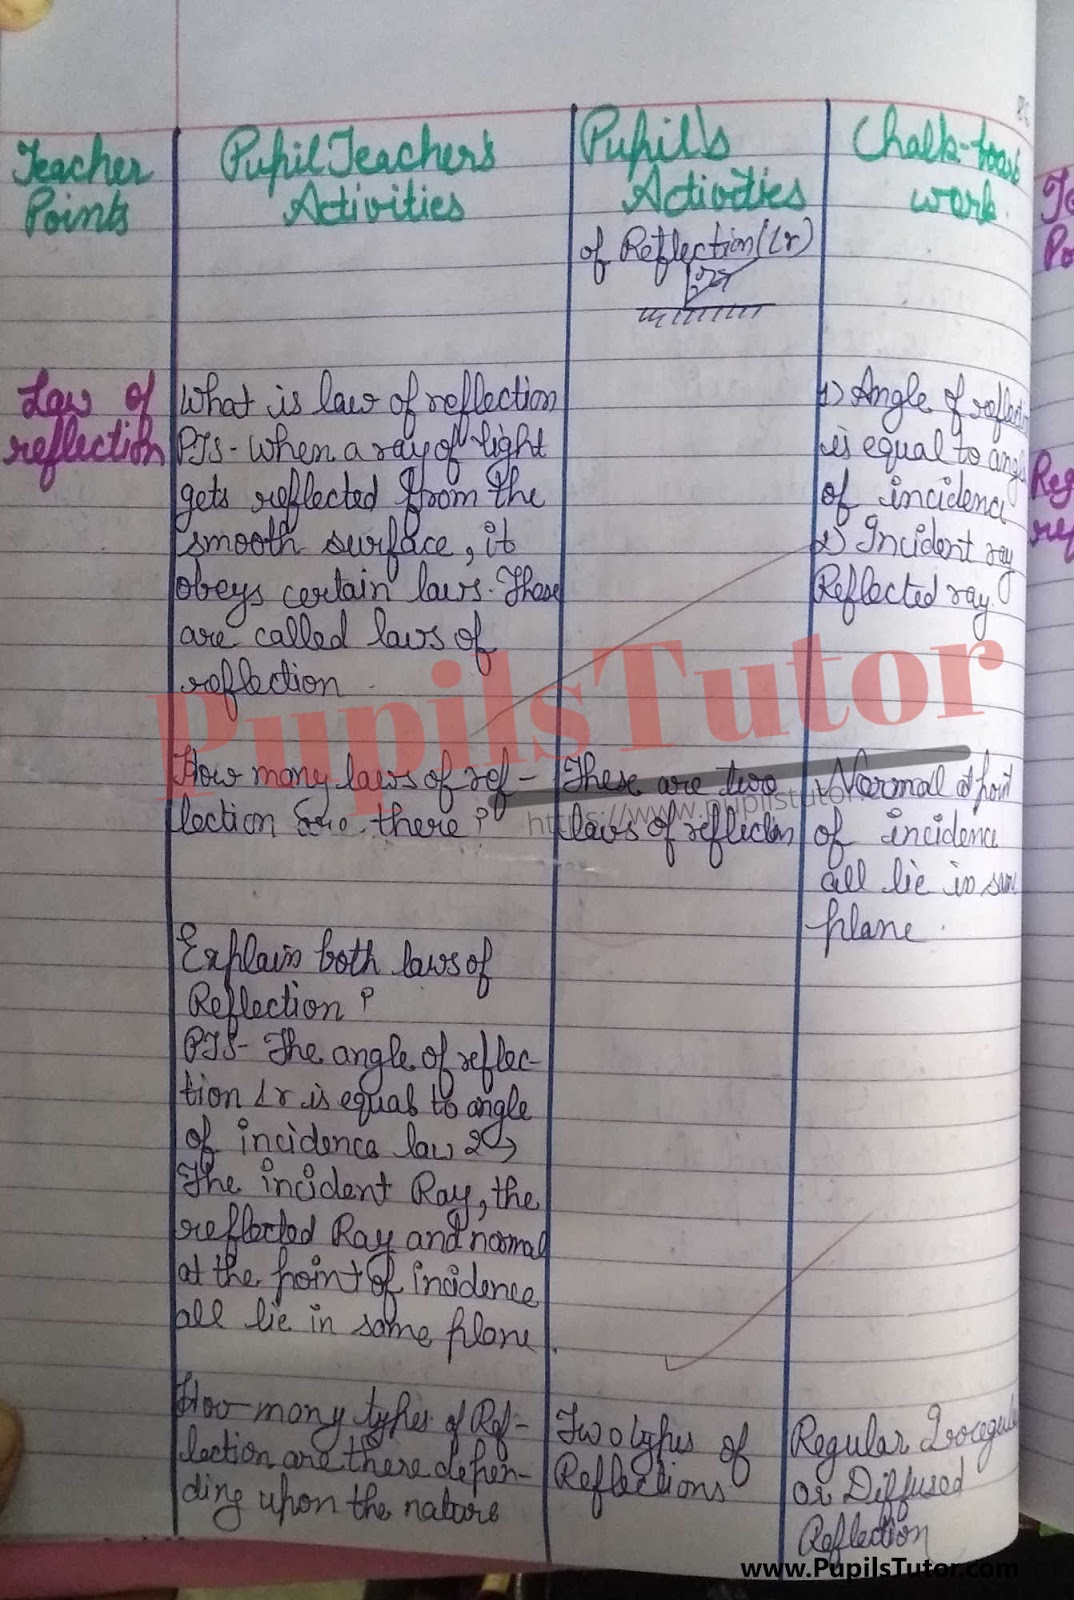 BED, DELED, BTC, BSTC, M.ED, DED And NIOS Teaching Of Physical Science Innovative Digital Lesson Plan Format On Law Of Reflection And Light Topic For Class 4th 5th 6th 7th 8th 9th, 10th, 11th, 12th  – [Page And Photo 4] – pupilstutor.com